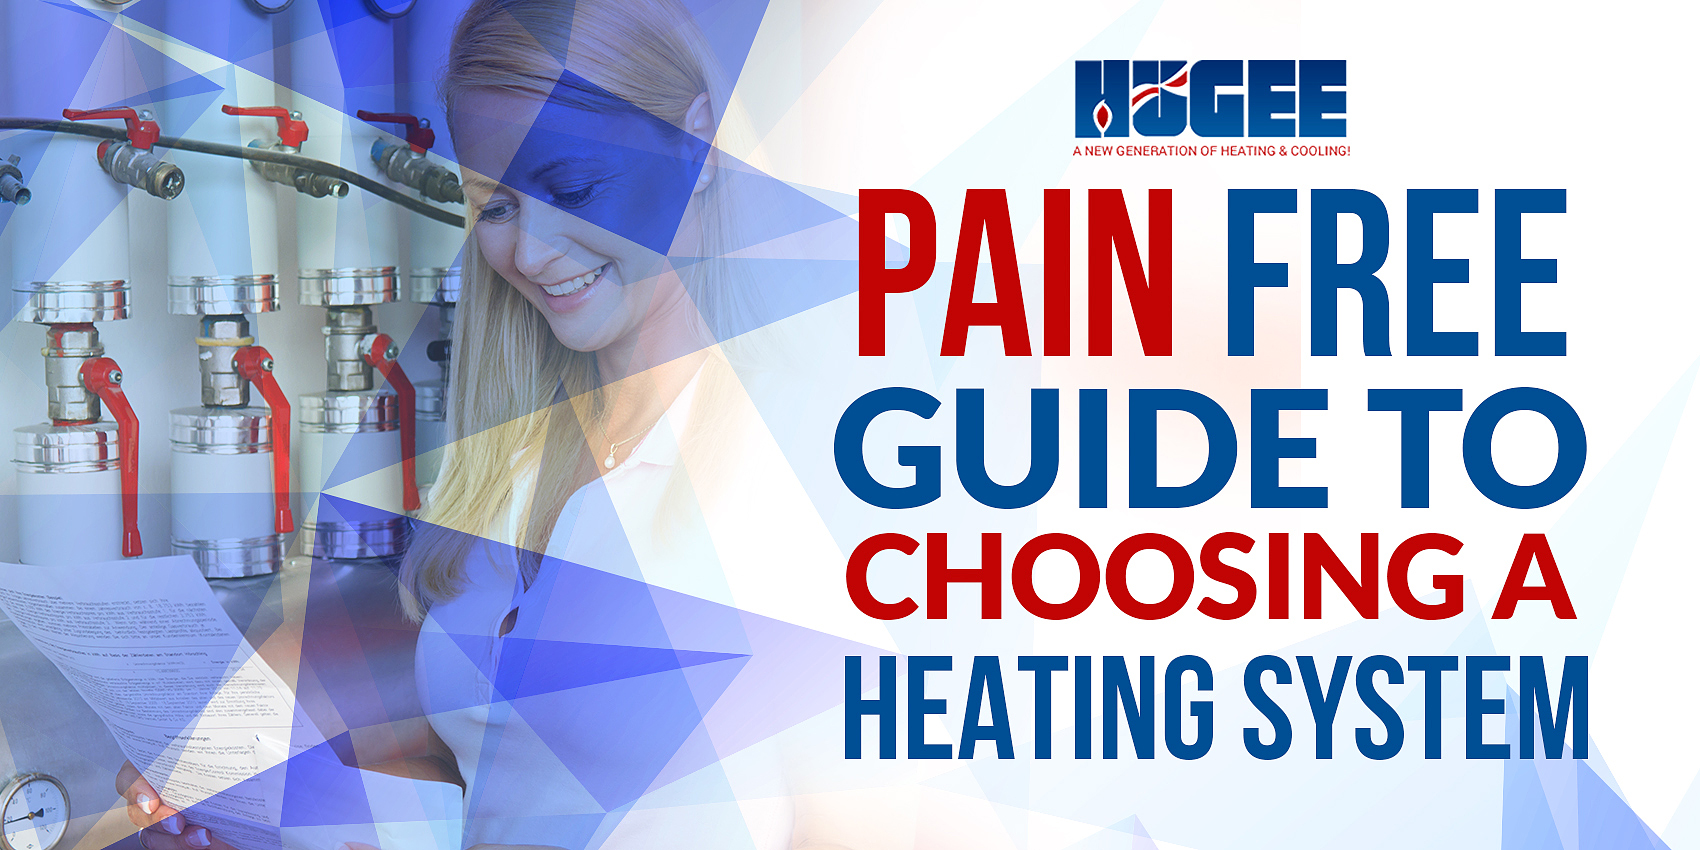 Pain-Free Guide to Choosing a Heating System